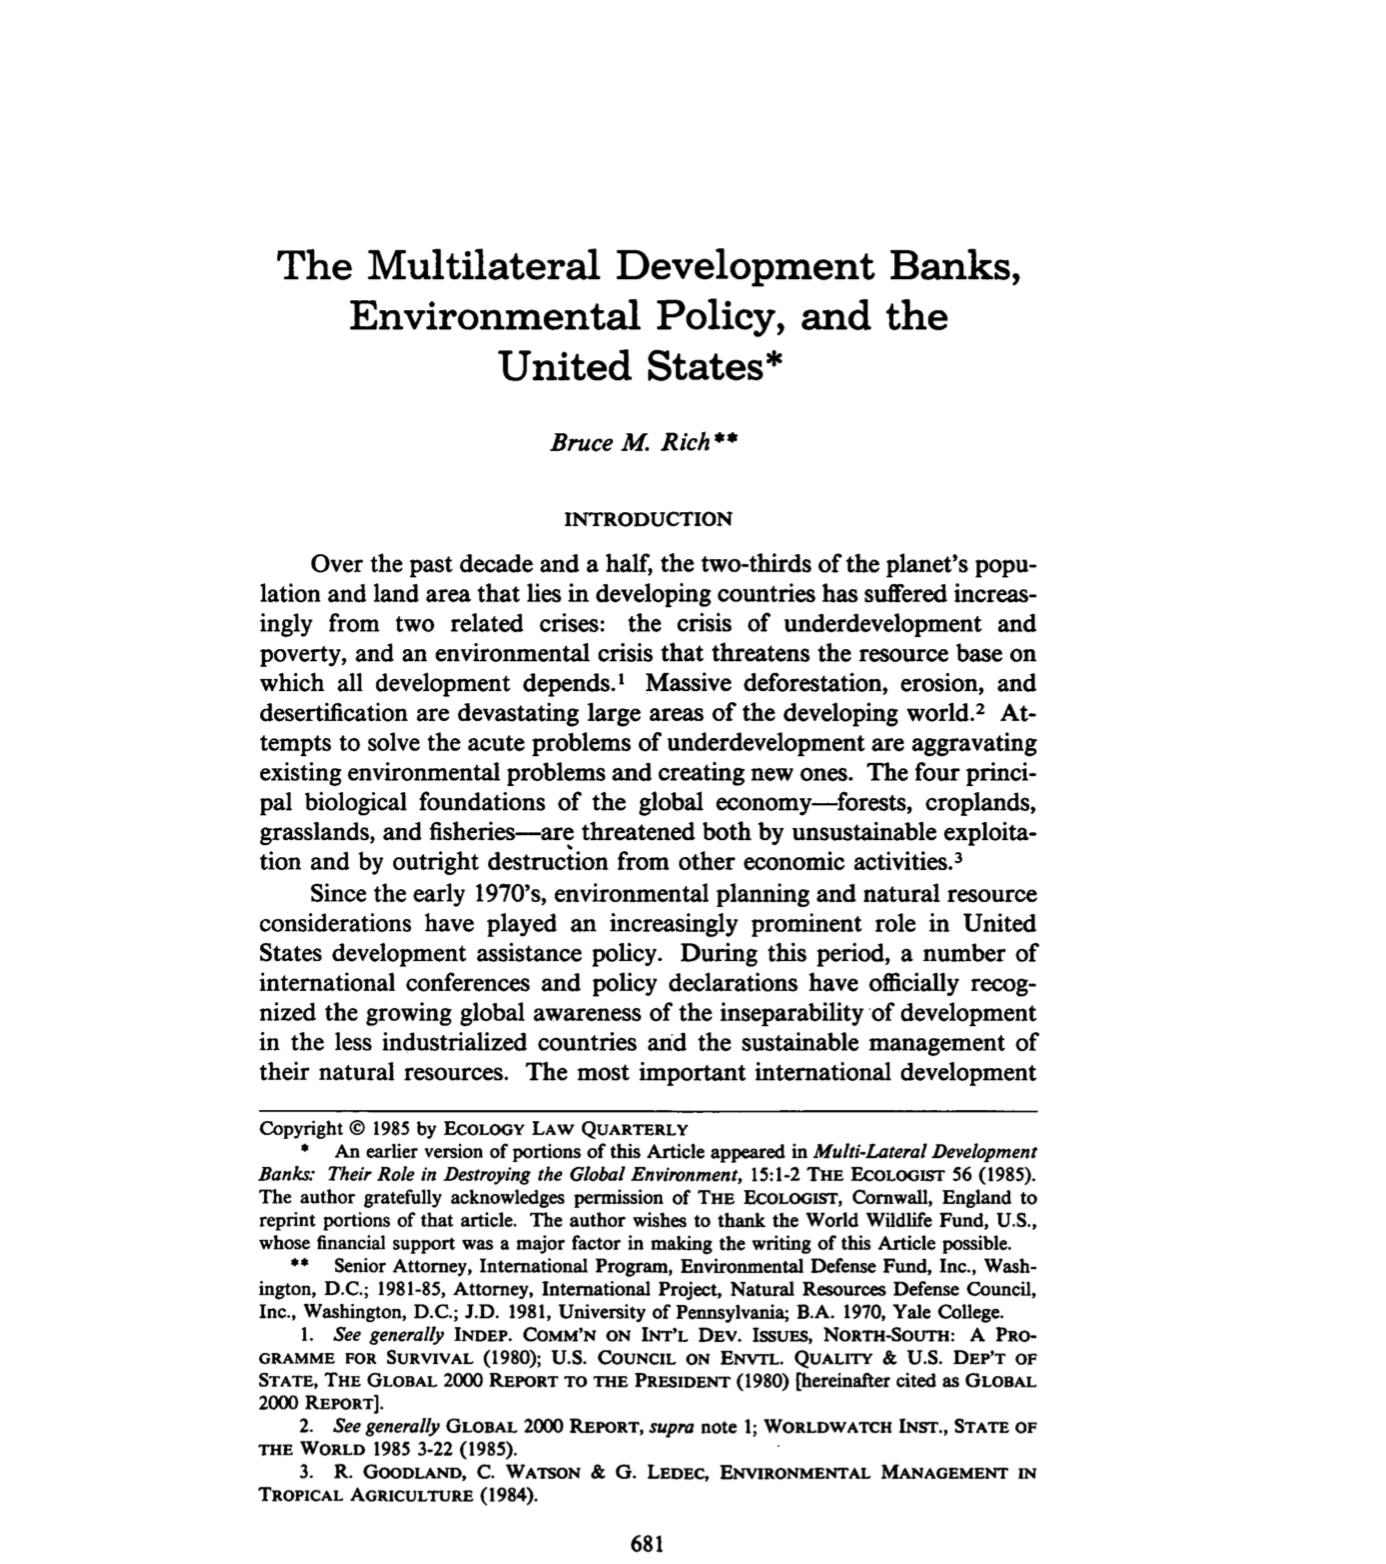 The Multilateral Develoment Banks, Environmental Policy, and the United States